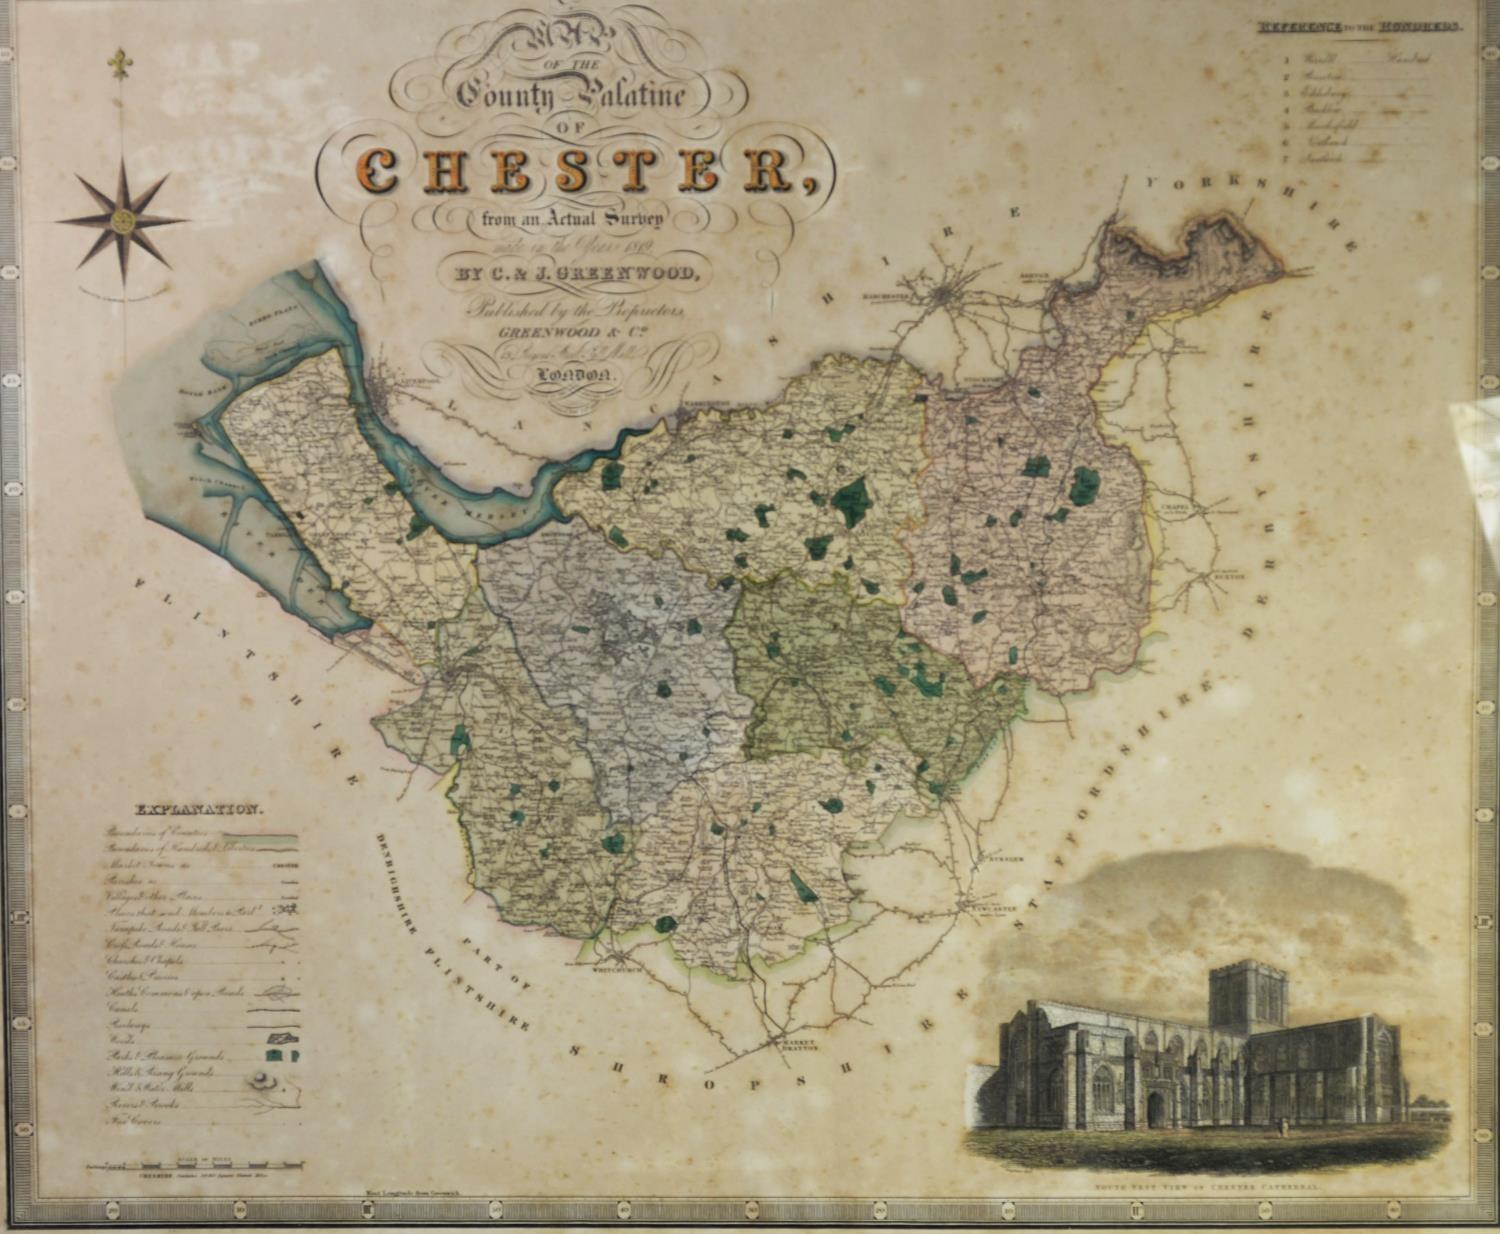 E. & J. GREENWOOD, ANTIQUE MAP 'CHESTER' (Cheshire)  published 1830 with illustration of Chester